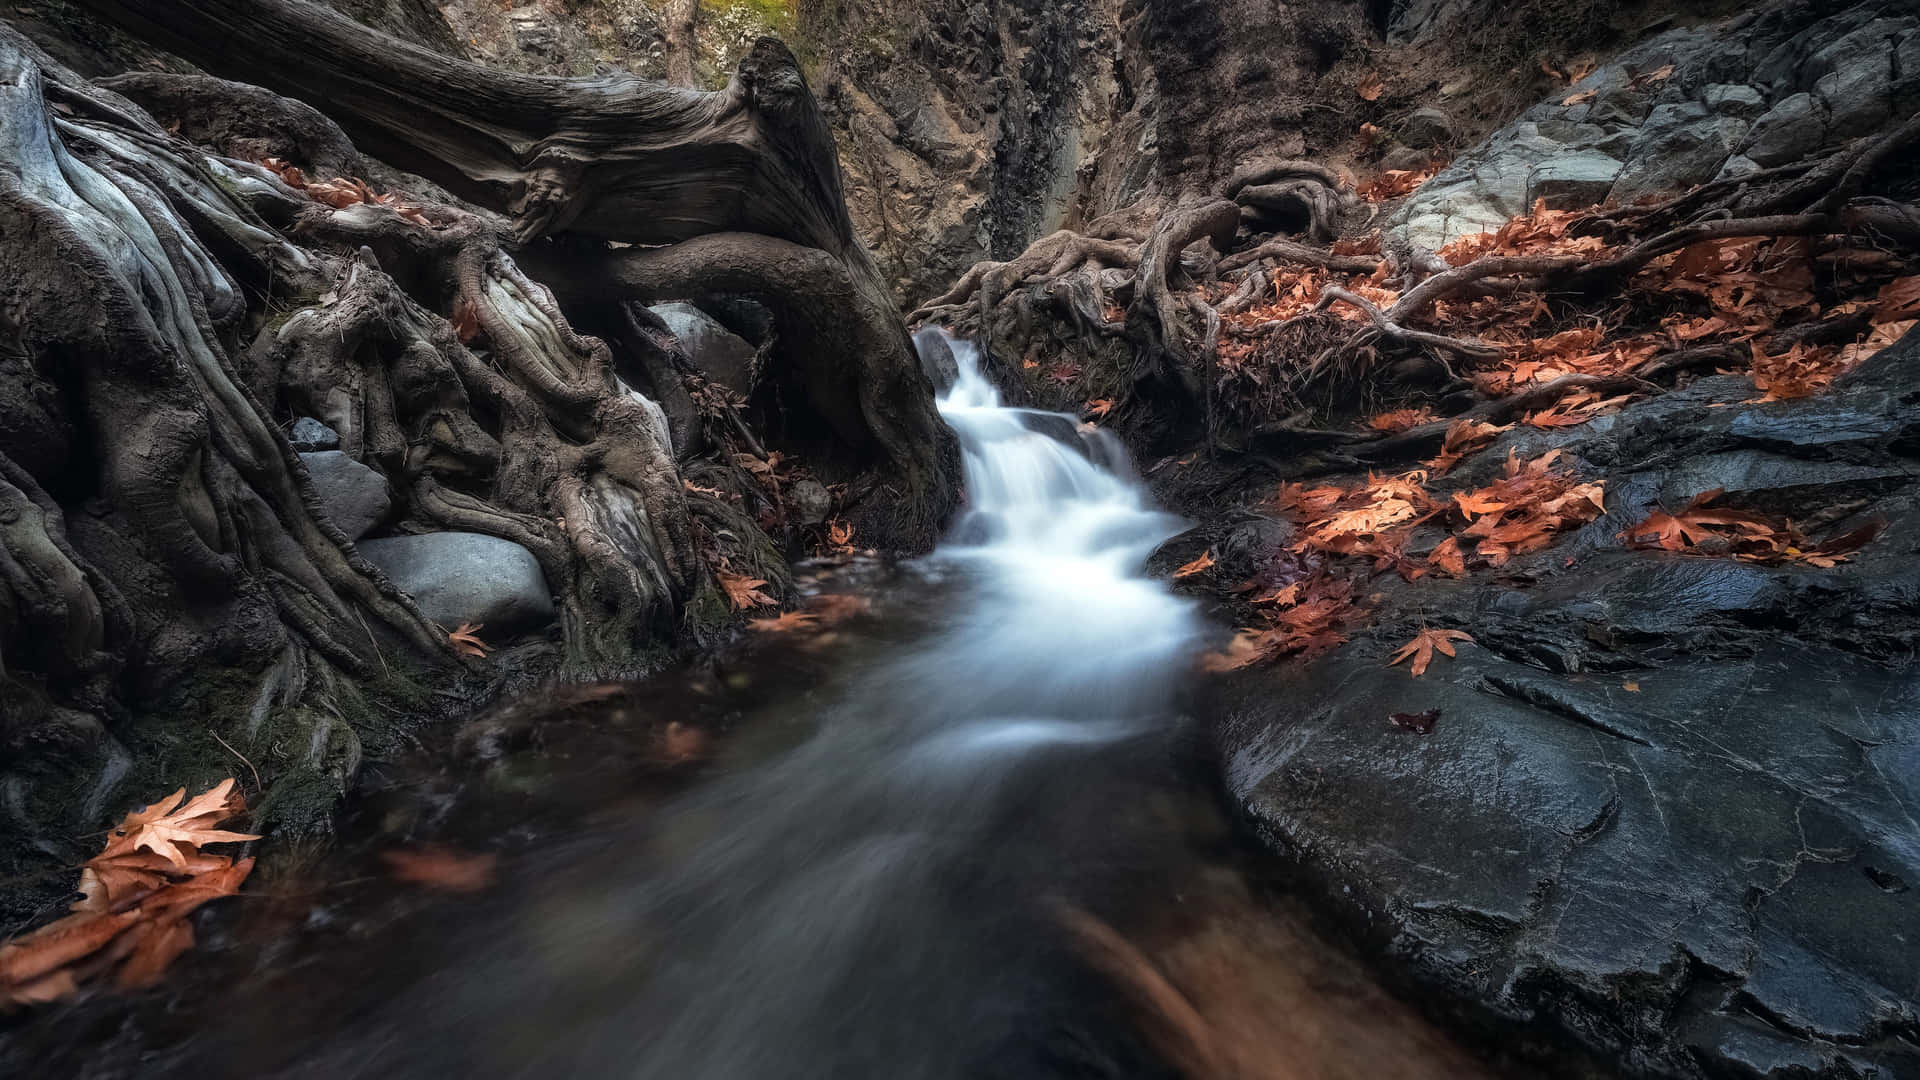 Water Passing Through Rocks And Roots Wallpaper